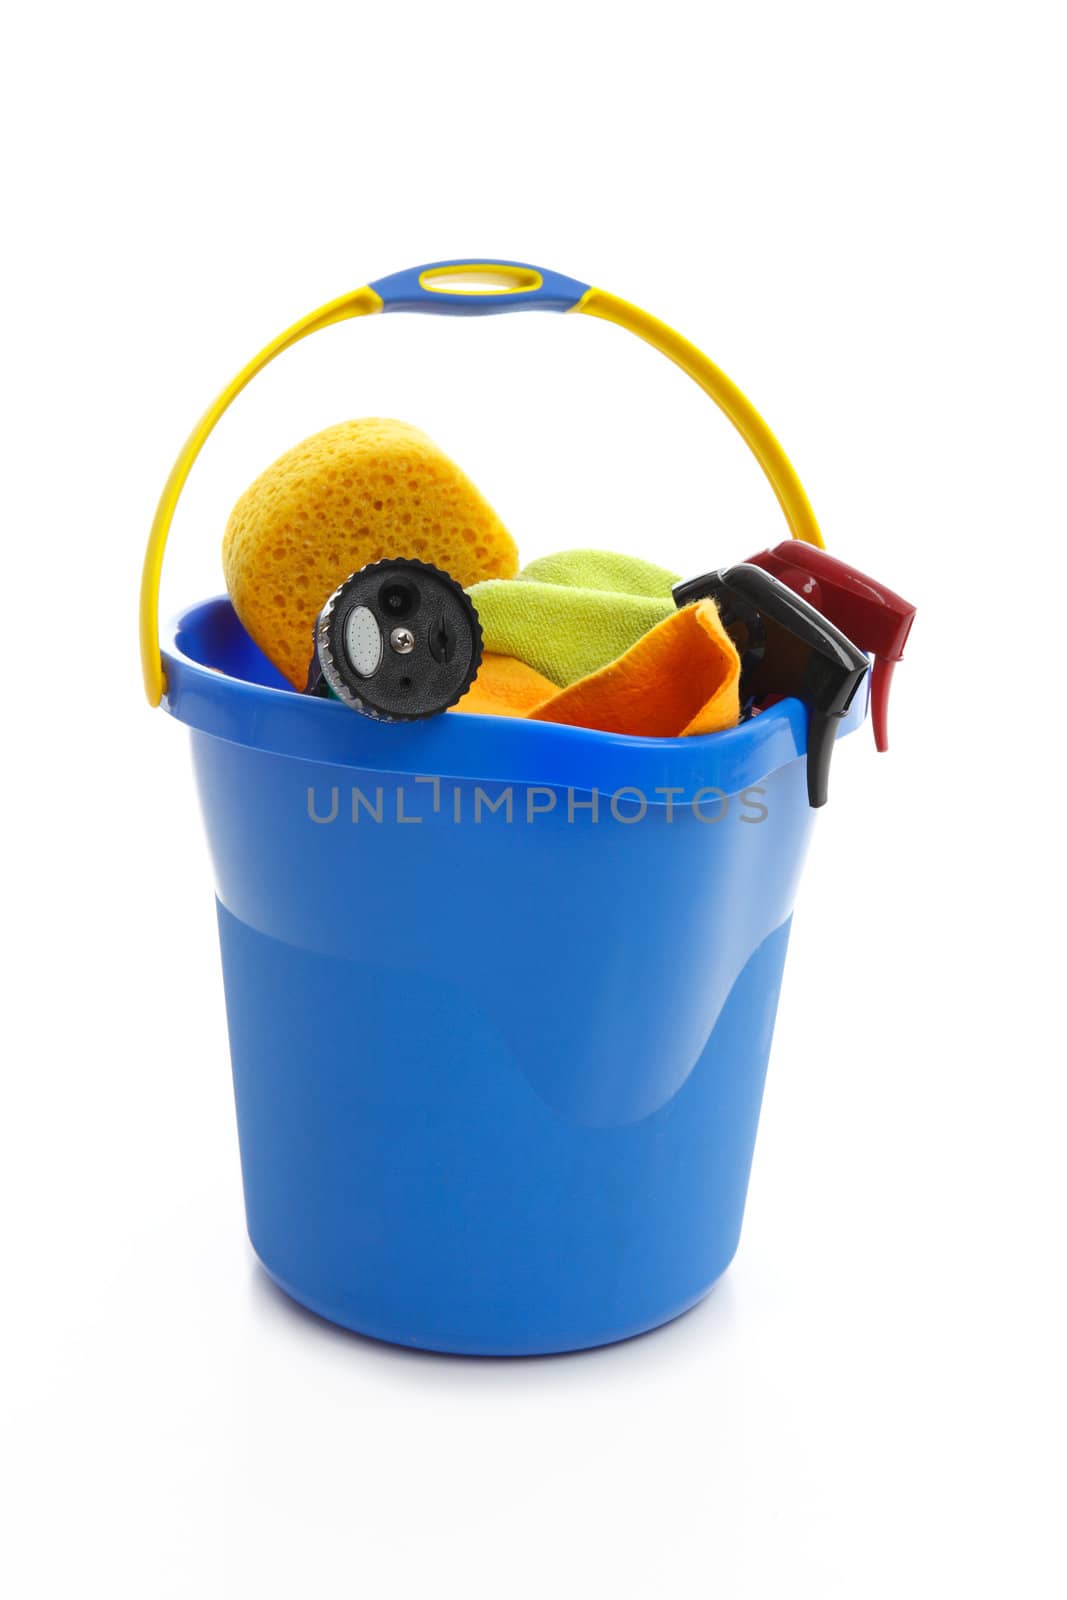 A bucket holding car cleaning products.